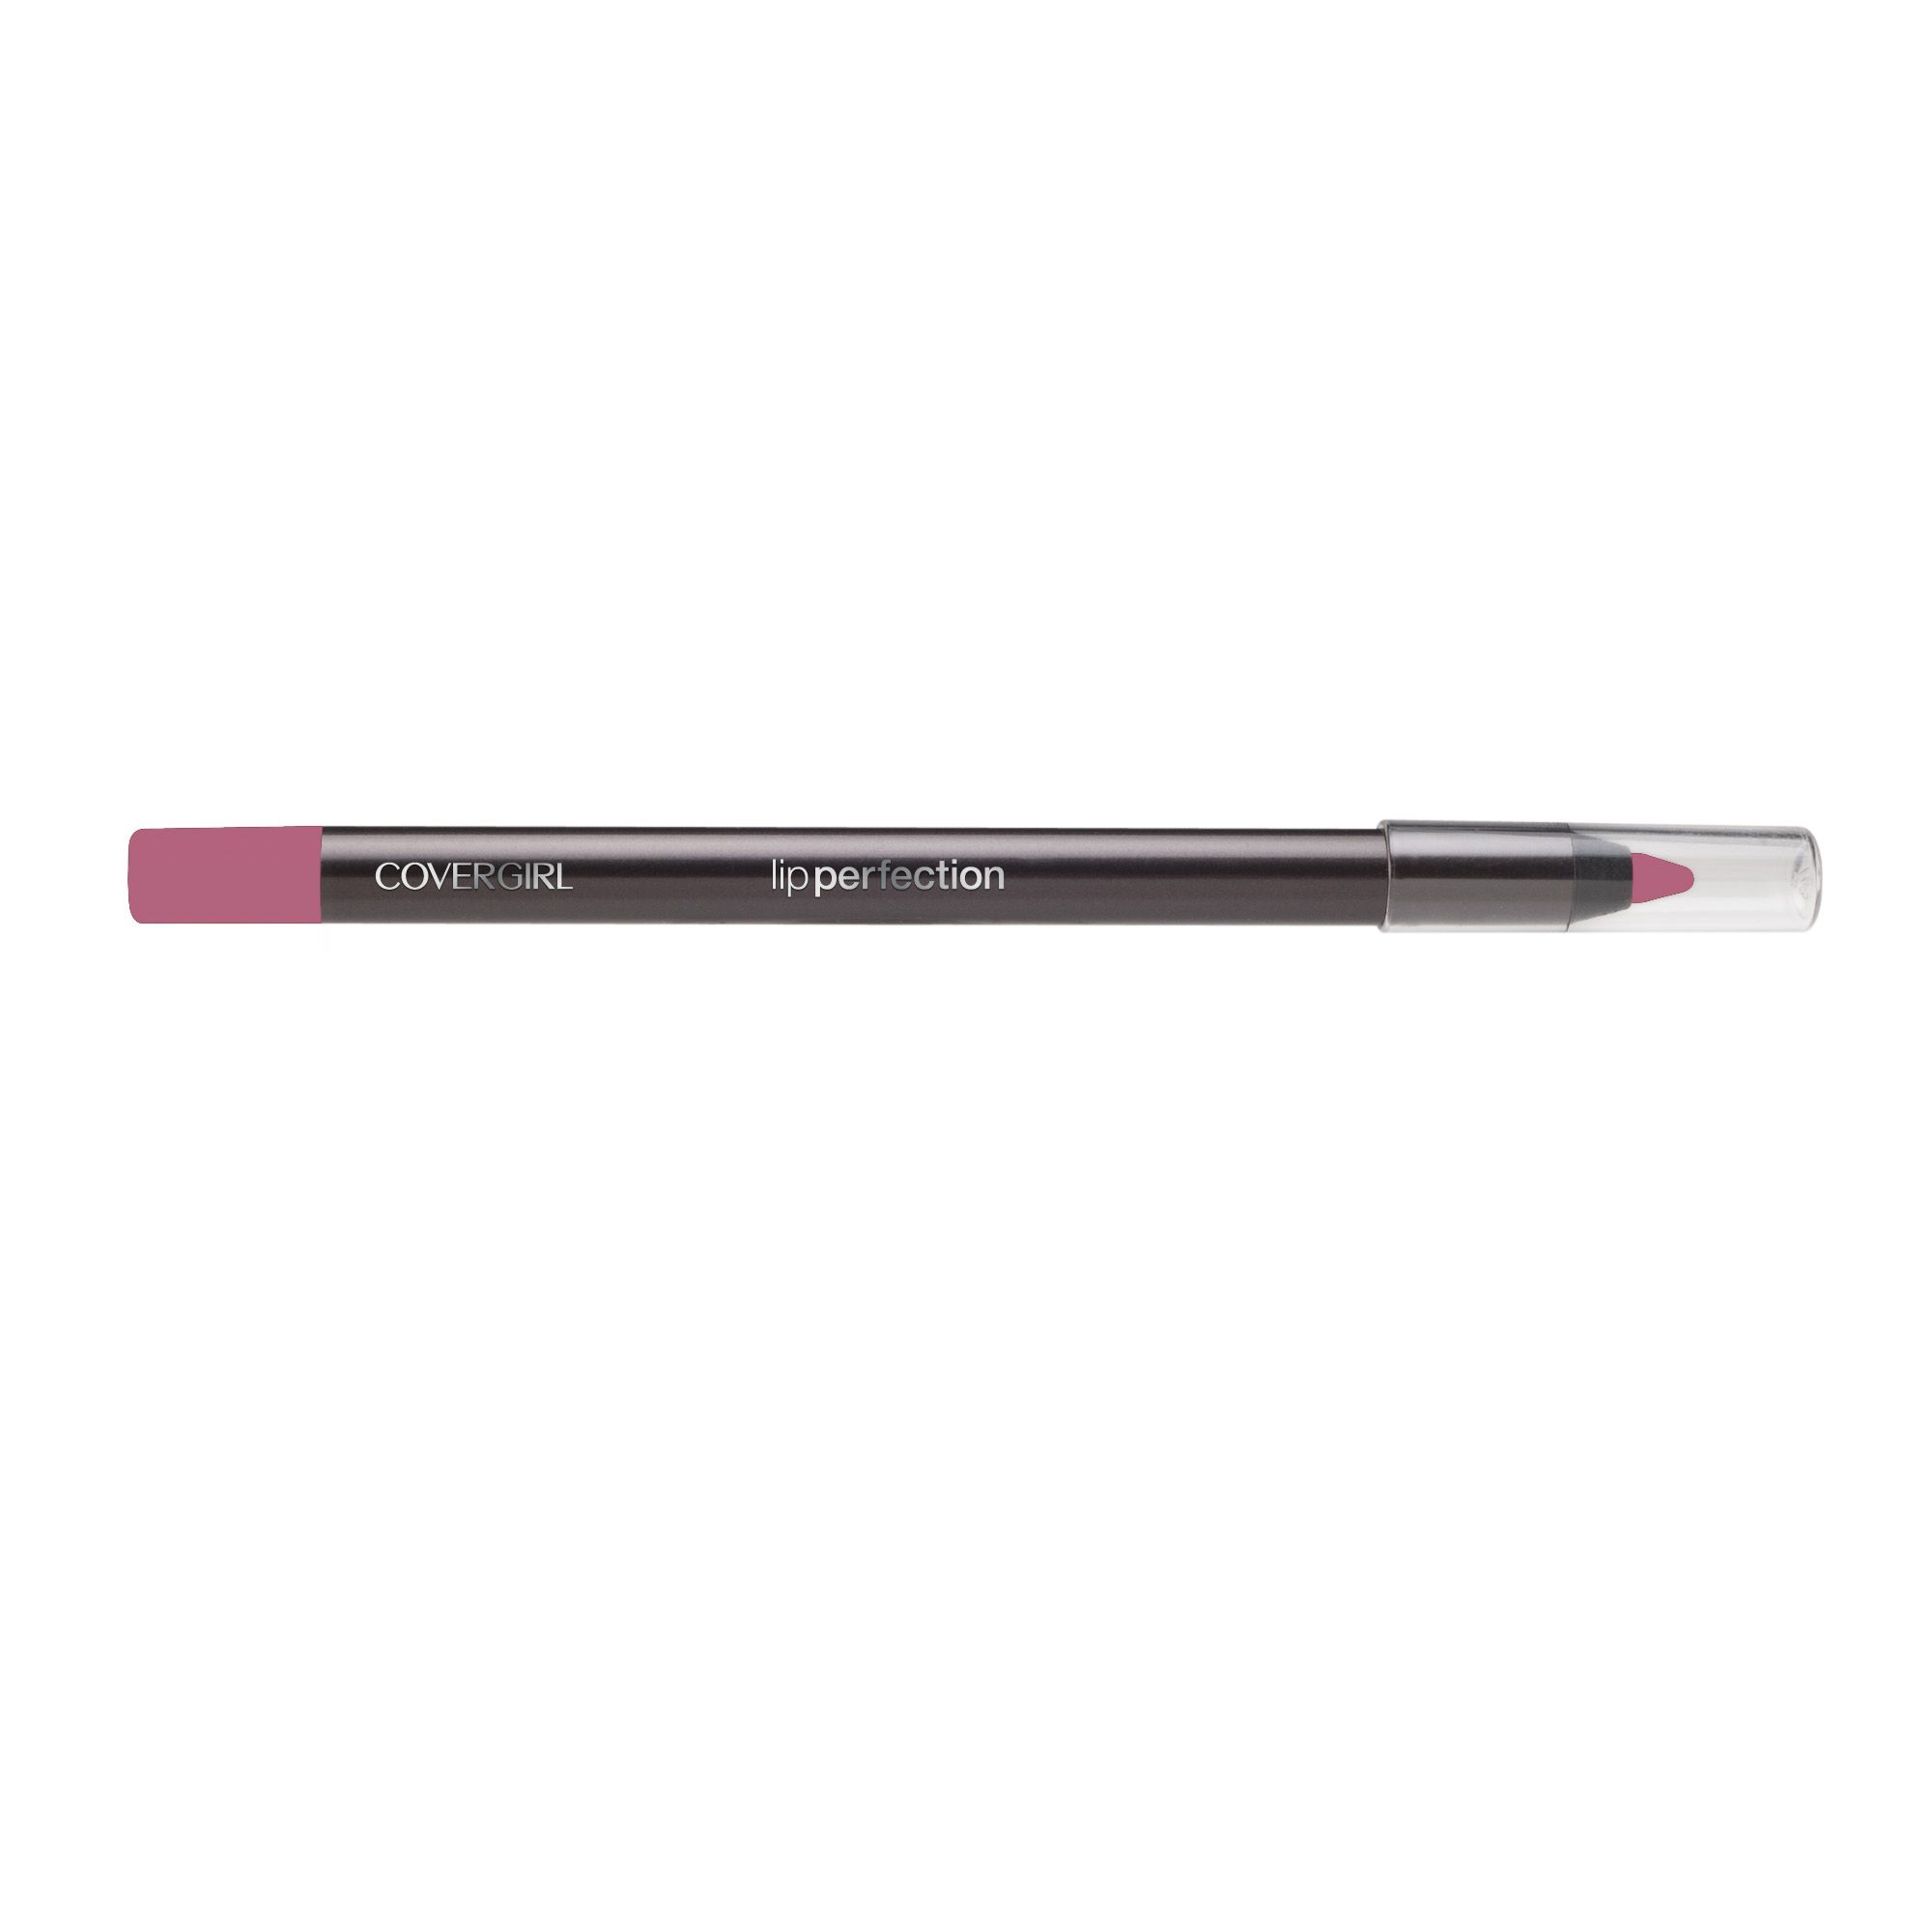 CoverGirl Lip Perfection Liner .040 oz.